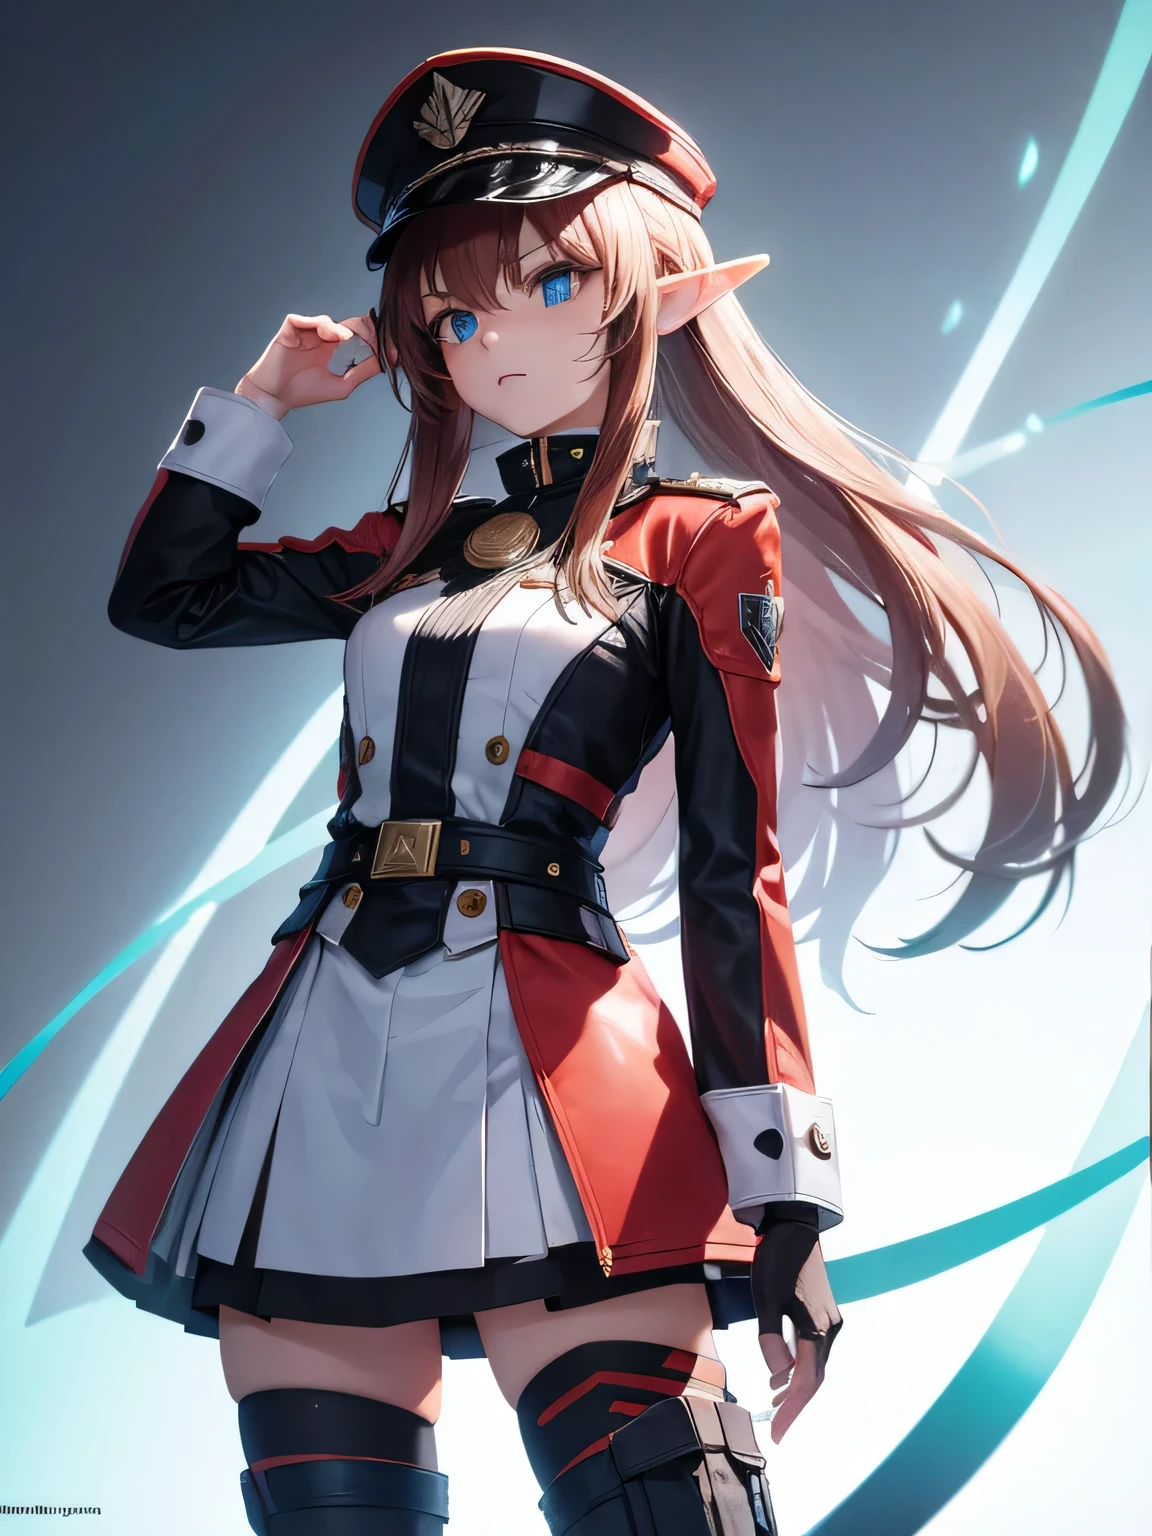 highly detailed 3D rendering of a character named Ulc from SEGA's PSO2. elf-like female with pointed ears, (small gray woman's Garrison cap), (long straight dark red hair), (gray futuristic military-style uniform, including a fitted jacket with intricate white designs, shoulder epaulets, and a skirt), (annoyed, stupefied), (one hand near her ear as if she is communicating through a device), looking away